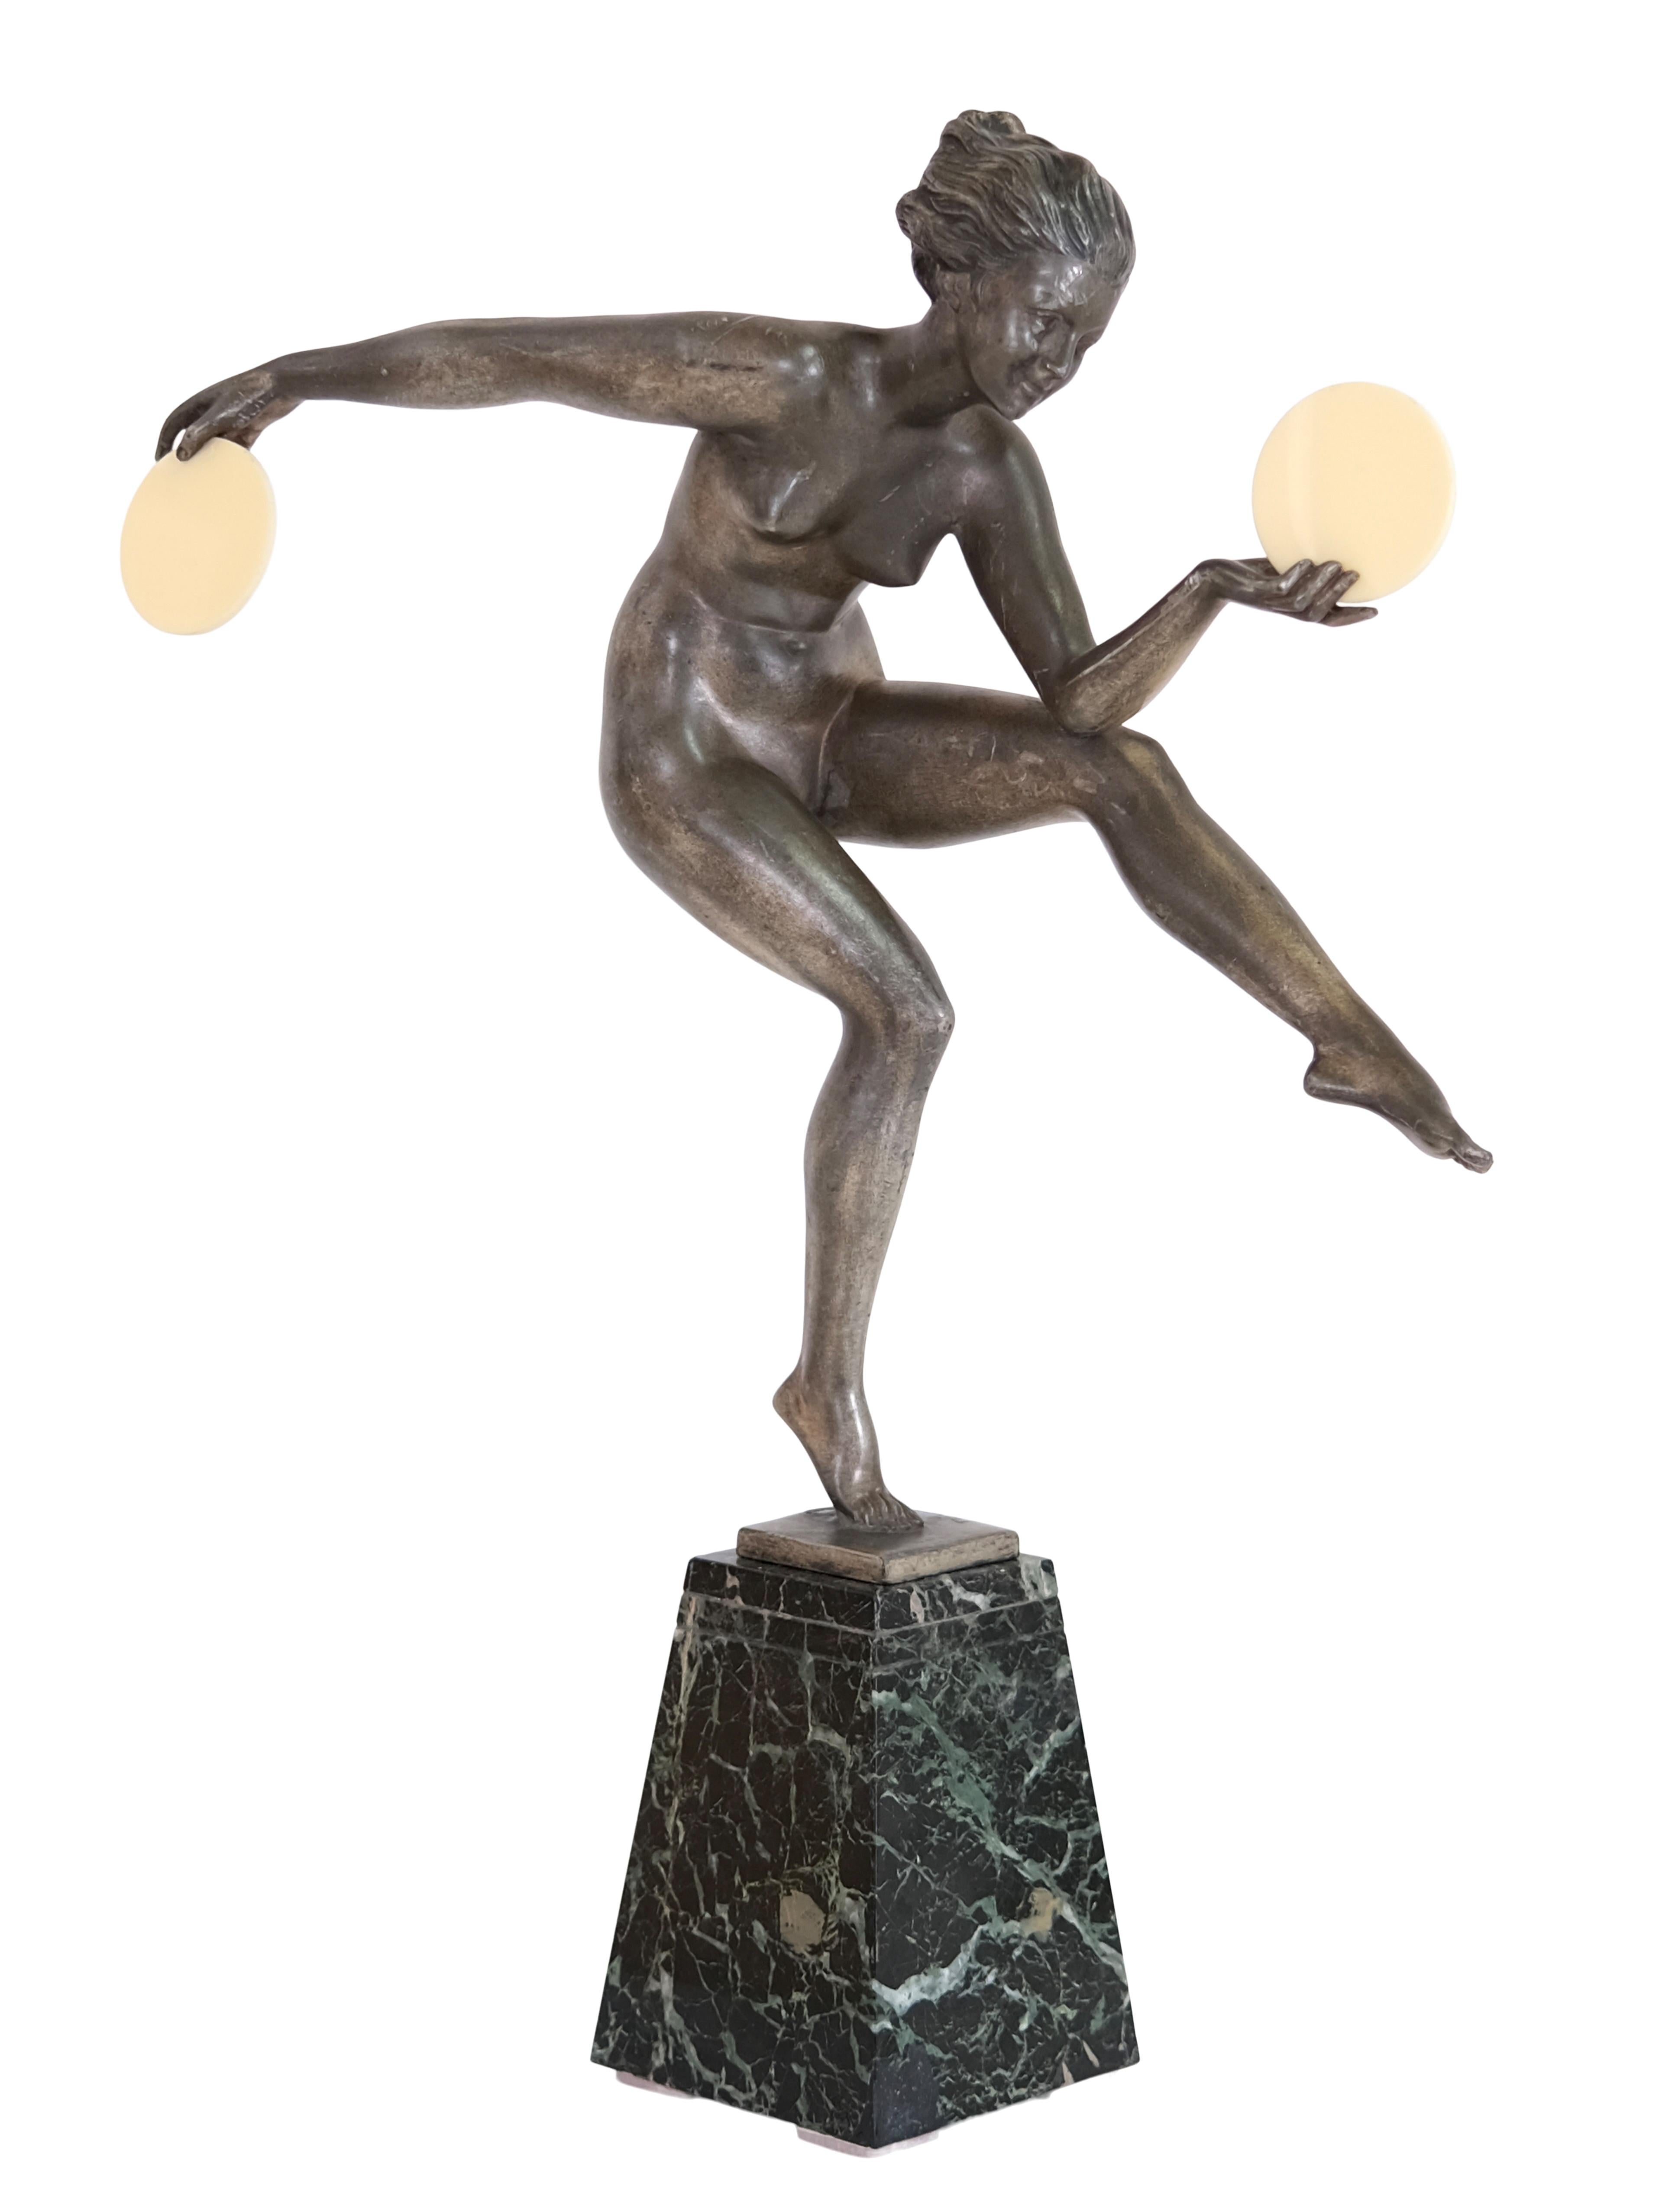 Danse païenne (french for: pagan dance)
Graceful sculpture of a dancer

Design and draft by by Alexandre-Joseph Derenne for Max Le Verrier

White bronze with original patina
Marble base
Discs made of resin

Original Art Deco, France